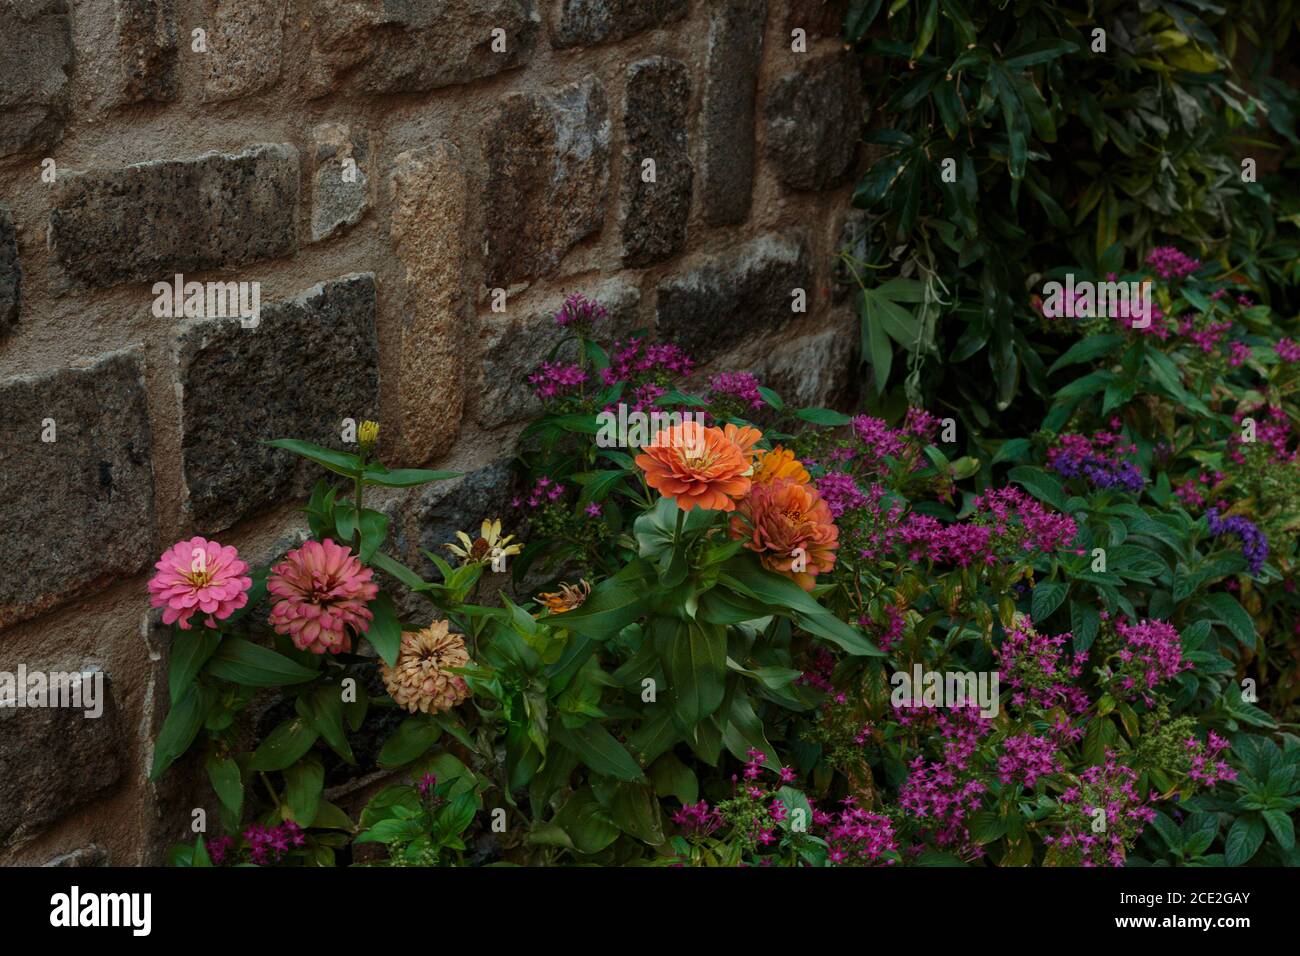 orange, pink and yellow zinnias growing against a stone wall with tiny purple star flowers scattered among the greenery Stock Photo